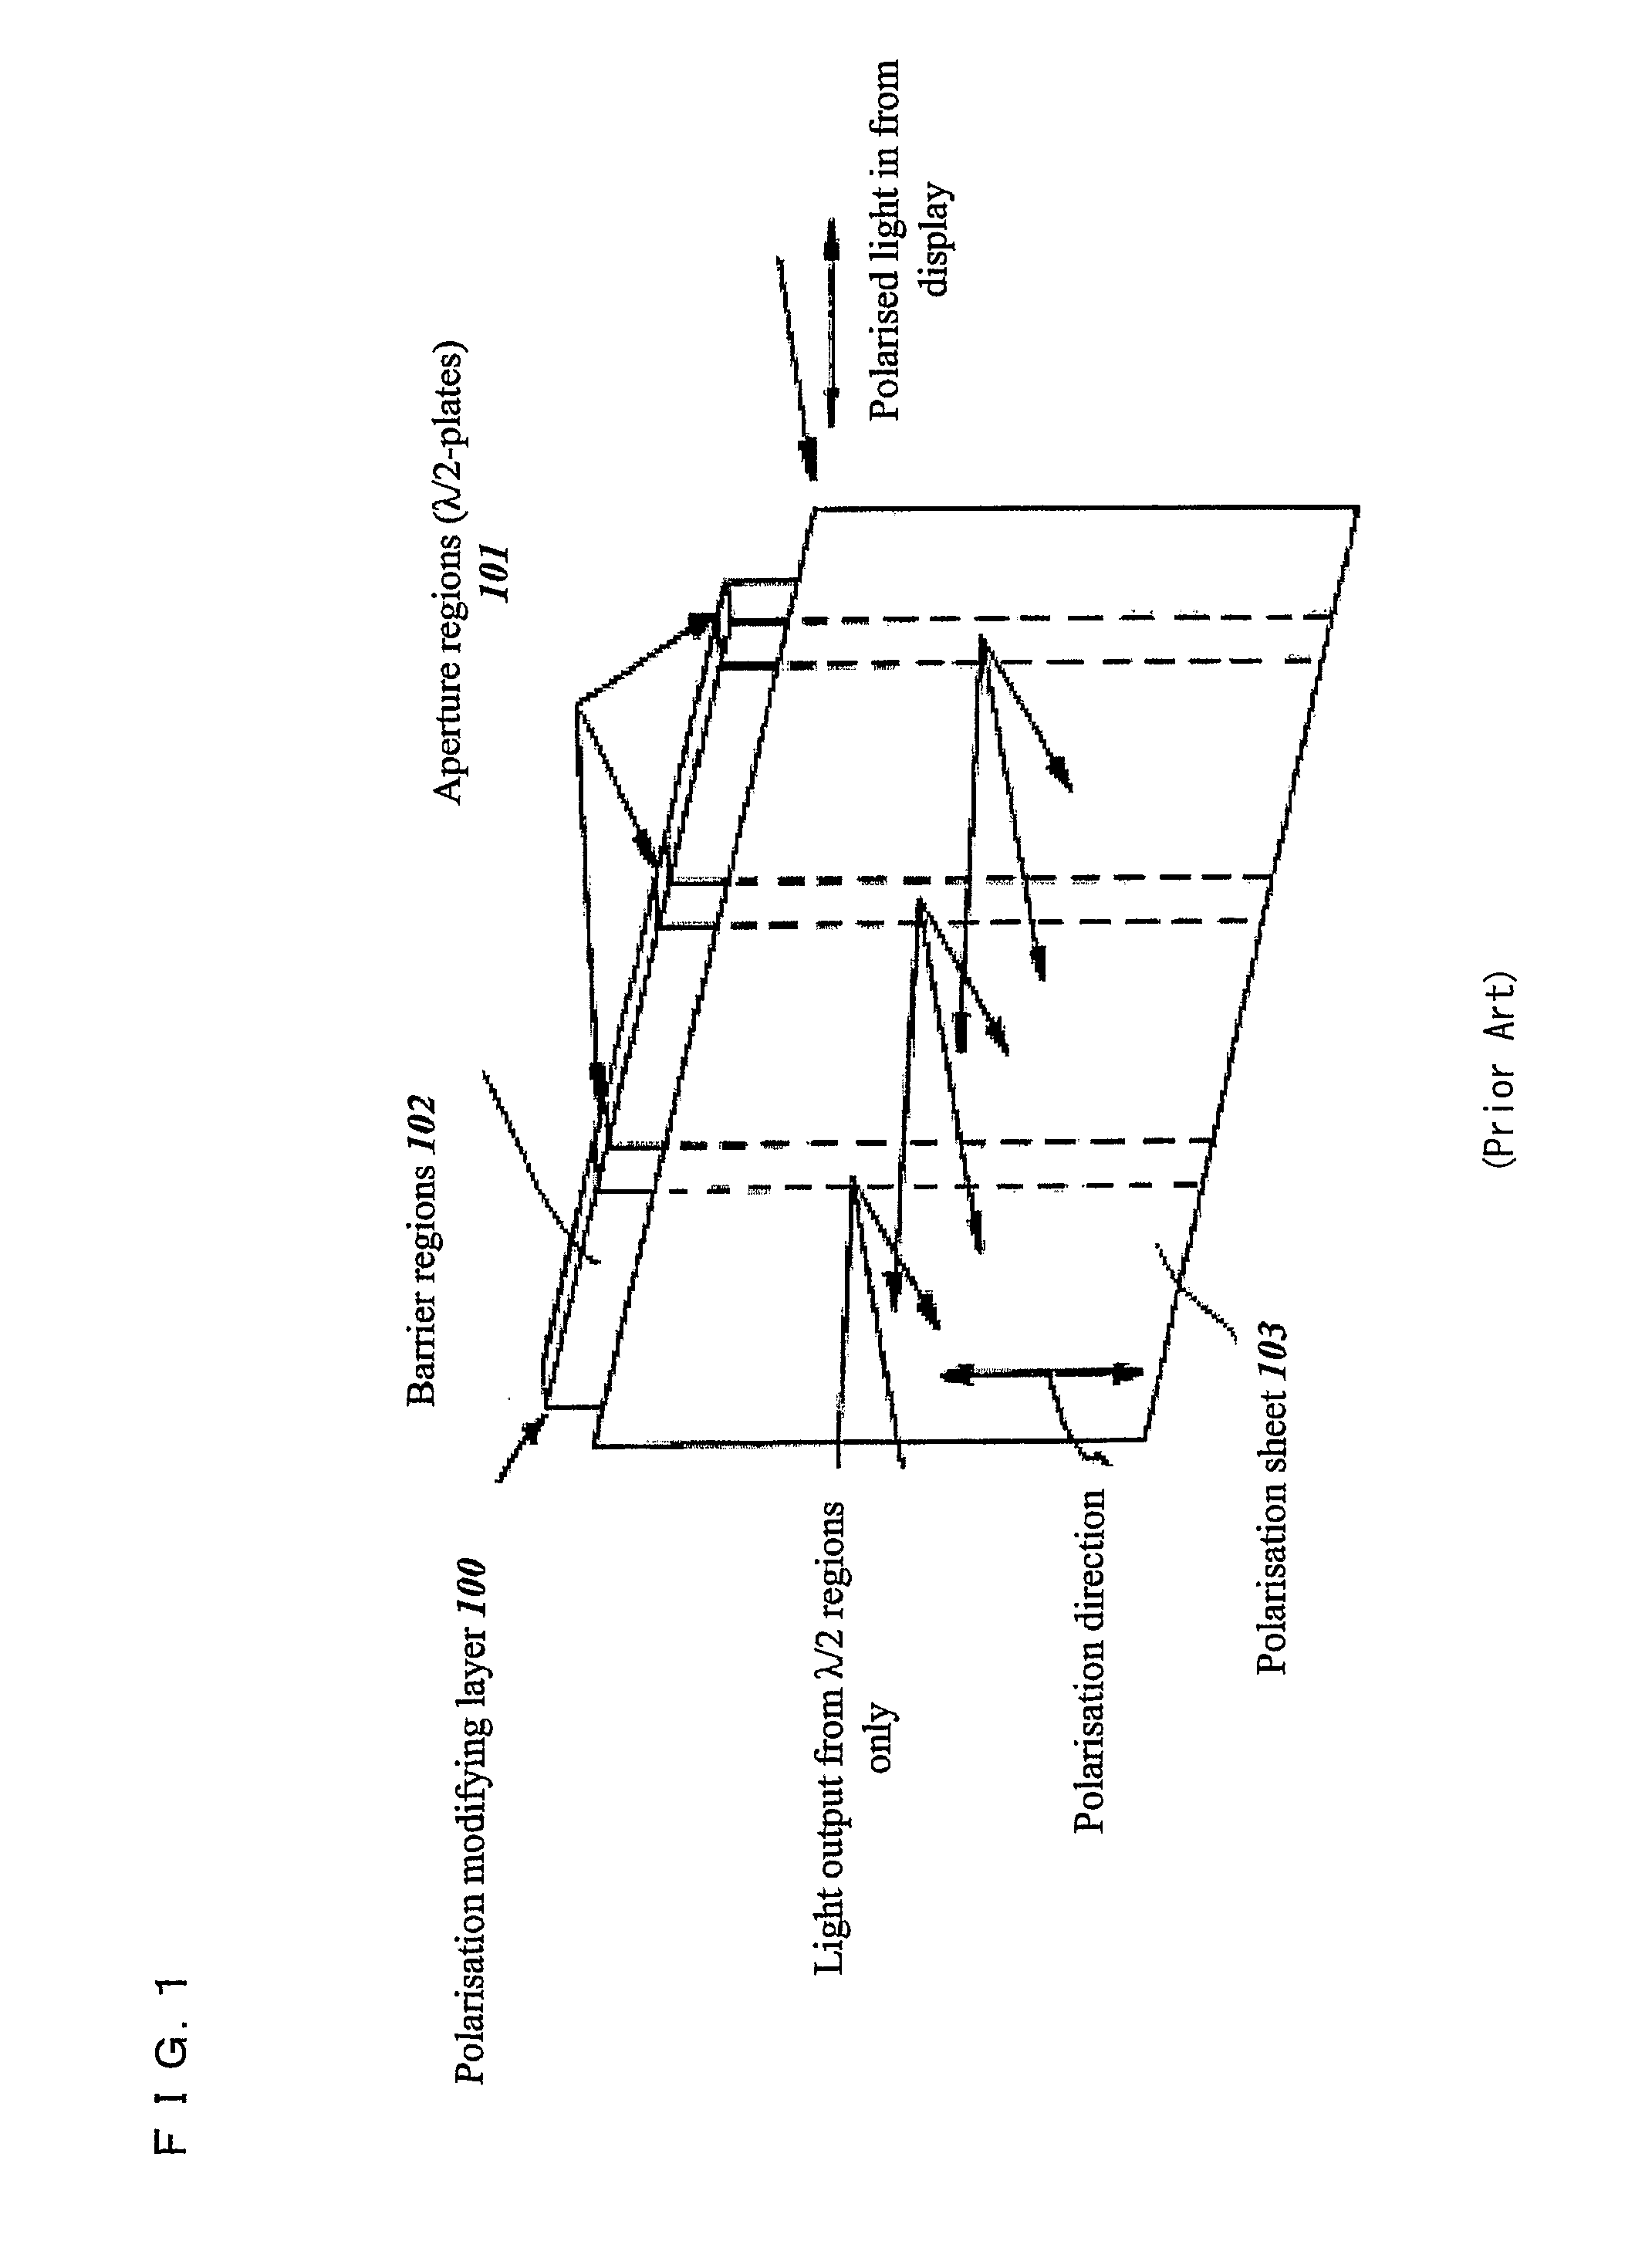 Optical system and display